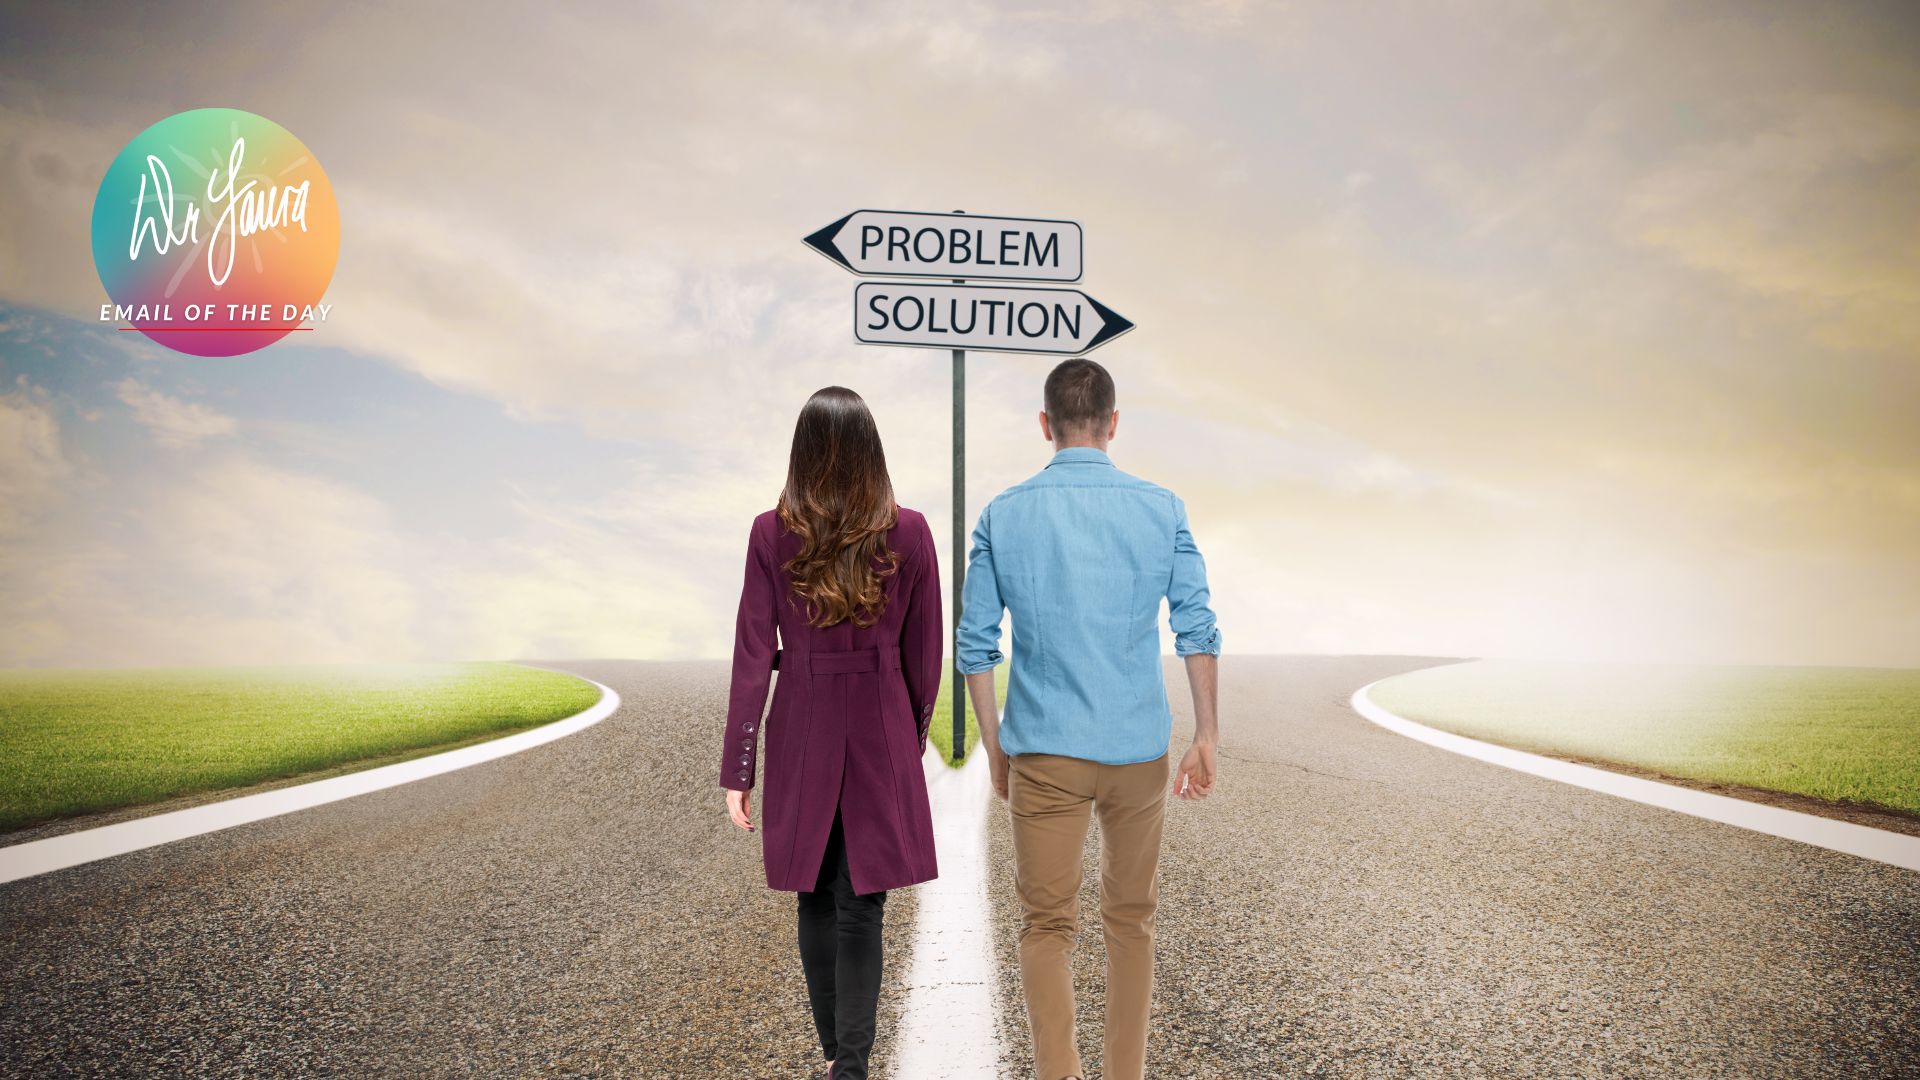 Man and woman walk on a road with two signs ahead of them with the words "Problem" and "Solution"